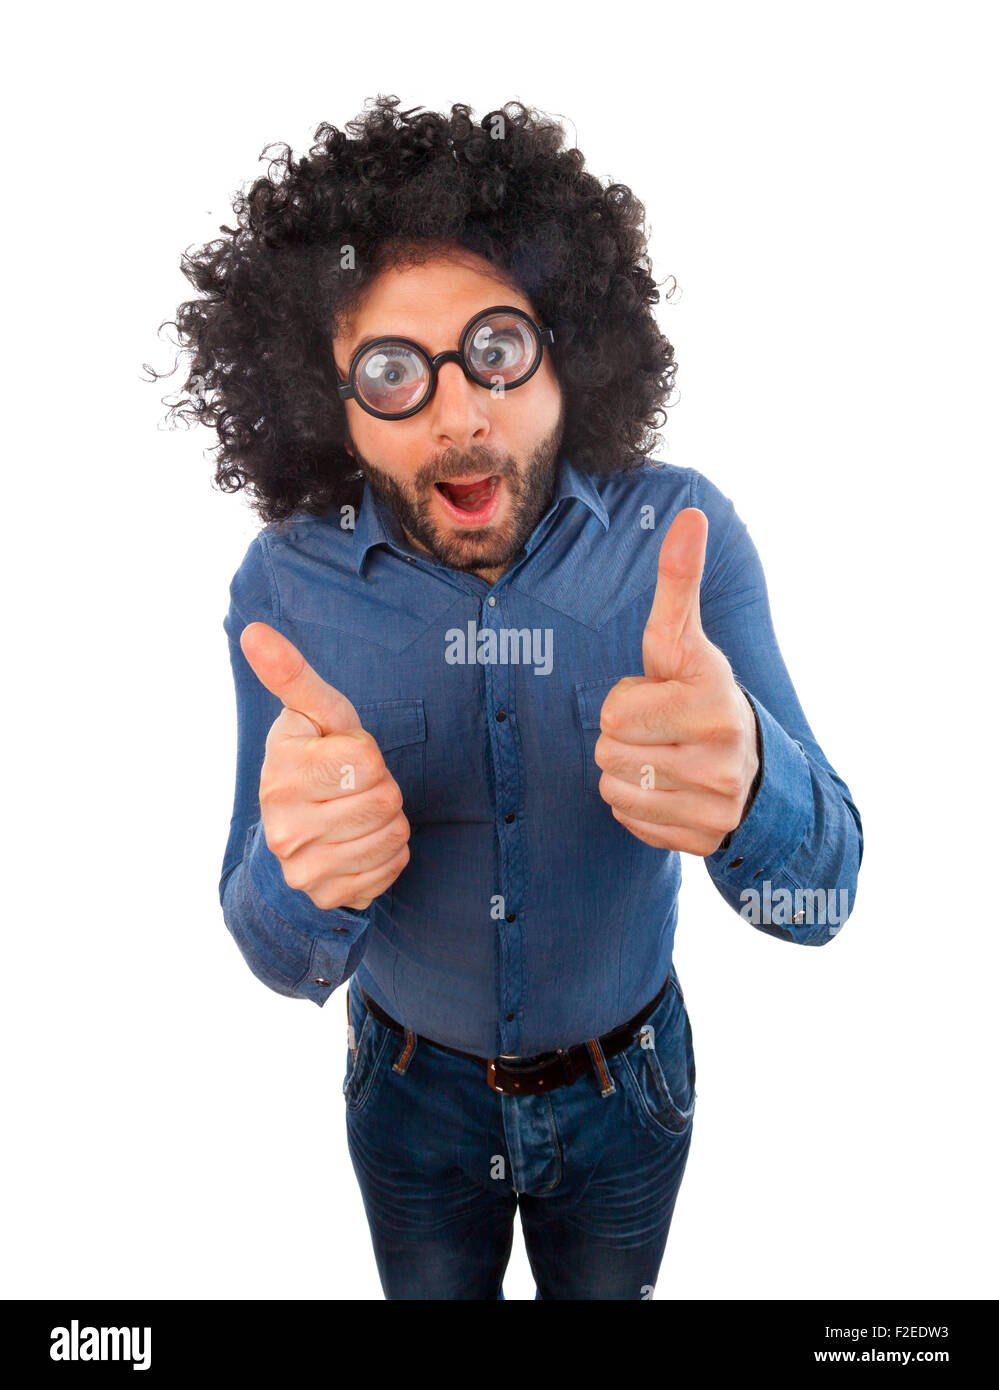 Man with crazy expression and thumb up on white background. Stock Photo